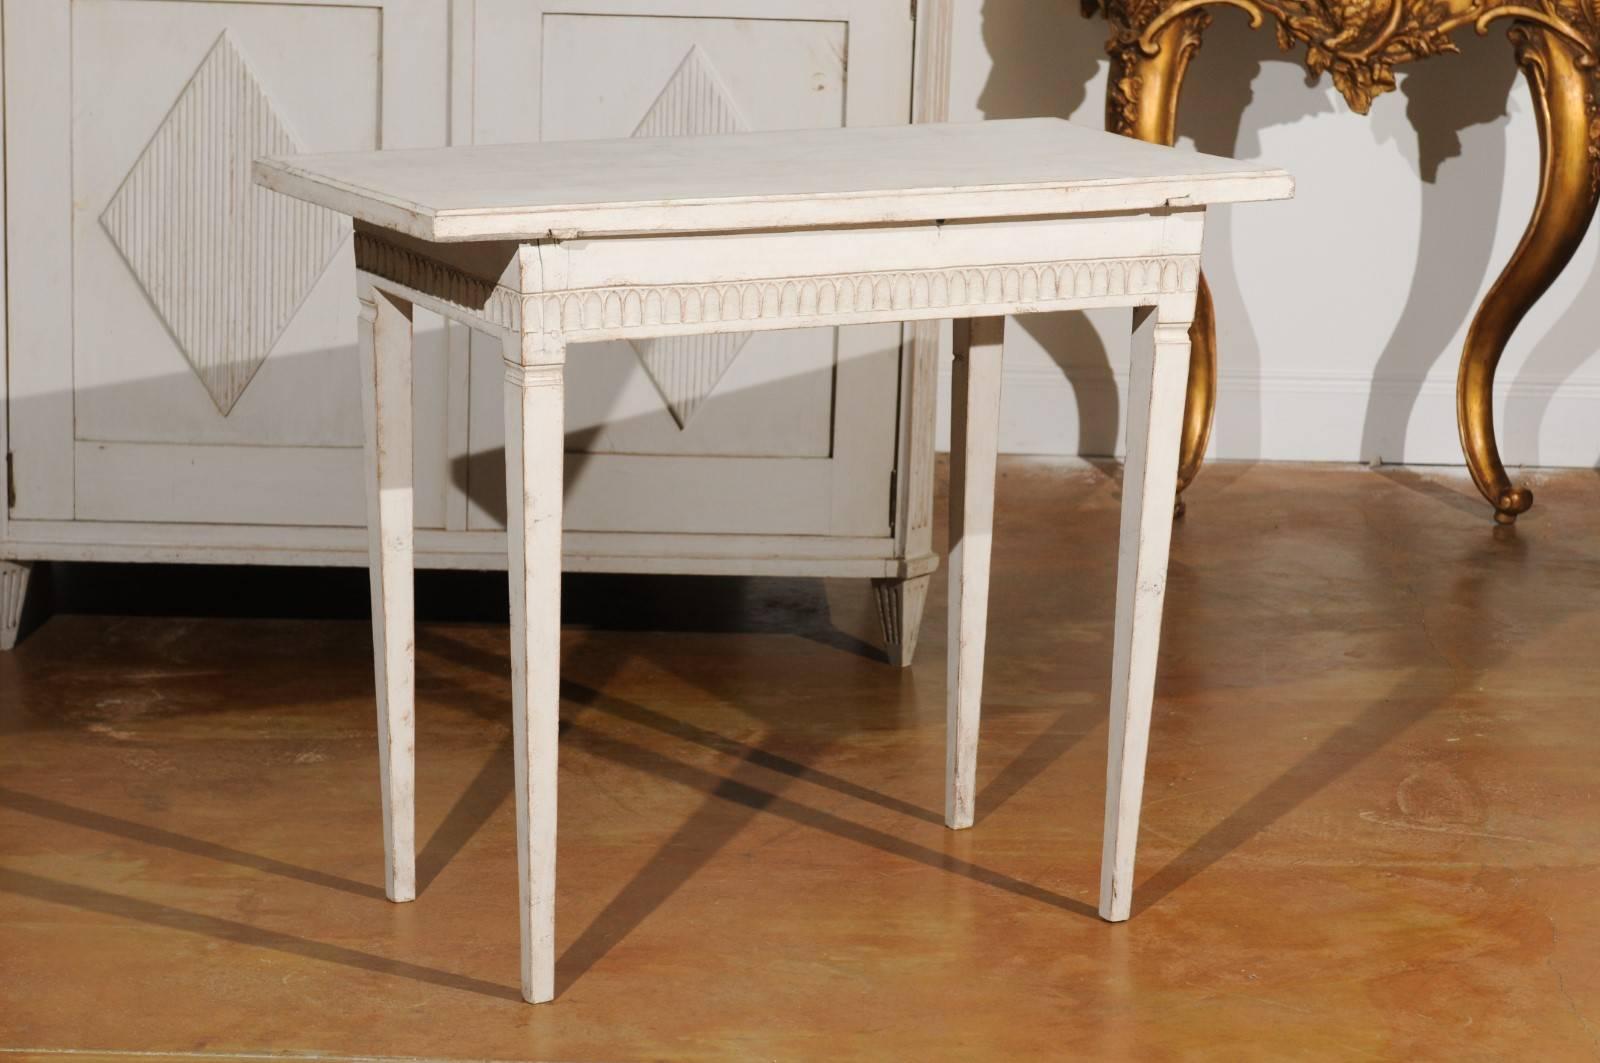 A Swedish neoclassical painted side table from the first half of the 19th century, with carved apron and tapered legs. This Swedish painted side table features a rectangular top with slightly bevelled edges, sitting above an exquisite carved apron